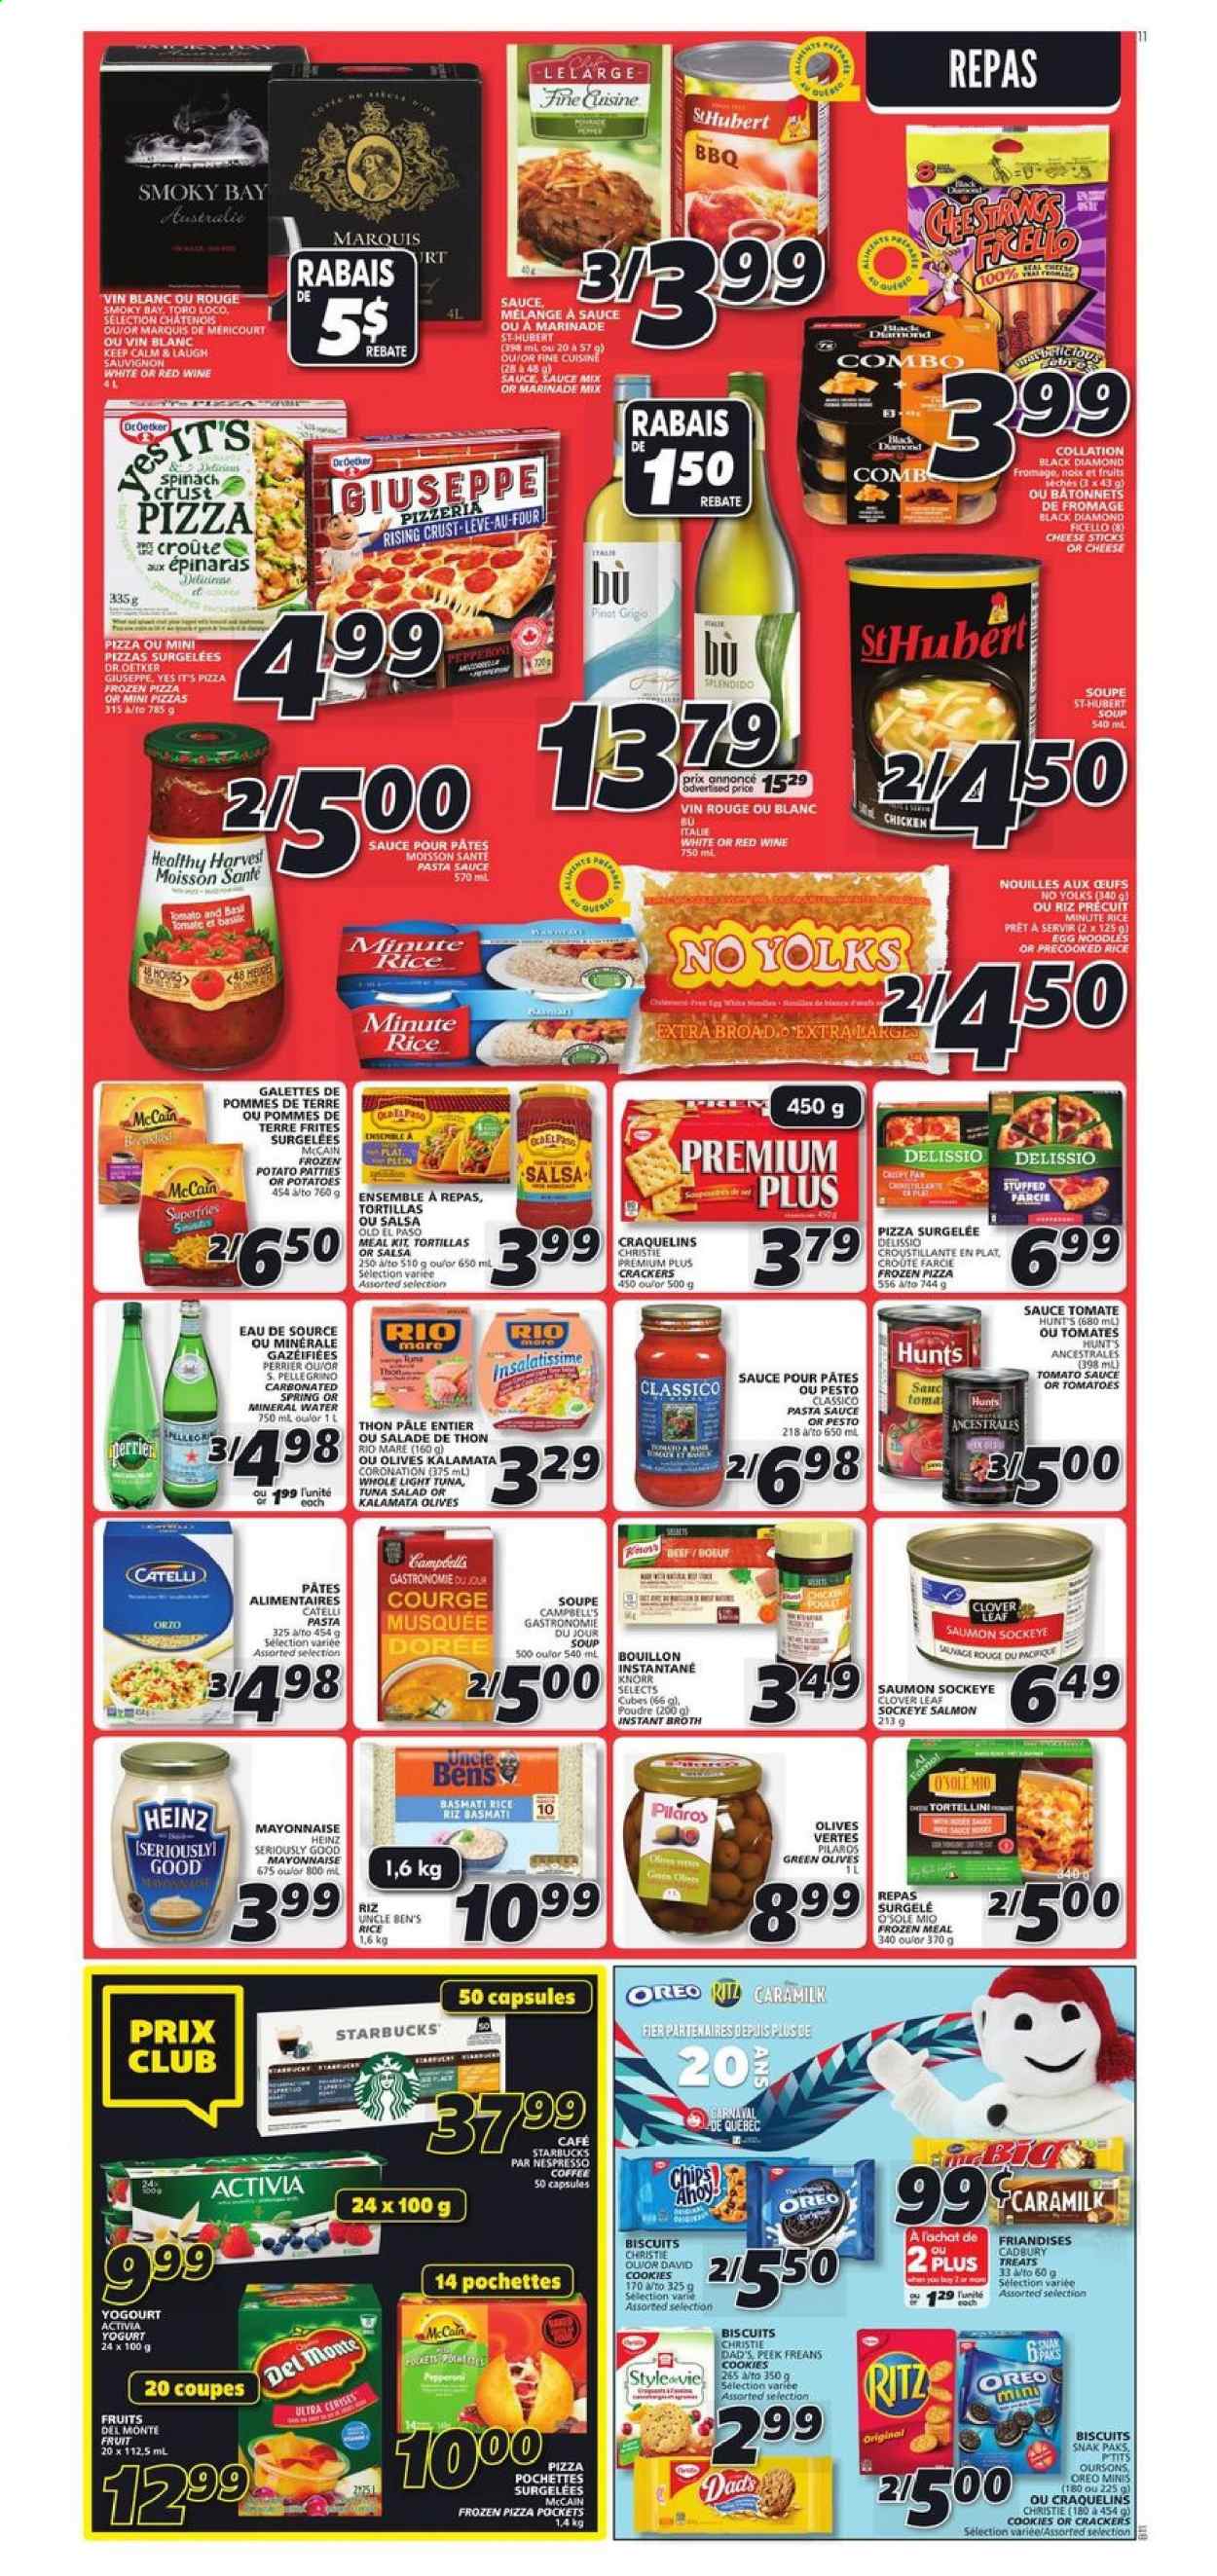 thumbnail - IGA Flyer - January 07, 2021 - January 13, 2021 - Sales products - tortillas, Old El Paso, potatoes, salmon, Campbell's, pizza, pasta sauce, soup, tortellini, pepperoni, tuna salad, Dr. Oetker, Oreo, yoghurt, Clover, Activia, eggs, mayonnaise, cheese sticks, McCain, potato fries, cookies, crackers, biscuit, Cadbury, RITZ, bouillon, broth, tomato sauce, Heinz, light tuna, Uncle Ben's, basmati rice, rice, salsa, marinade, Classico, Perrier, mineral water, coffee, Nespresso, Starbucks, white wine, Pinot Grigio, Knorr, olives. Page 8.